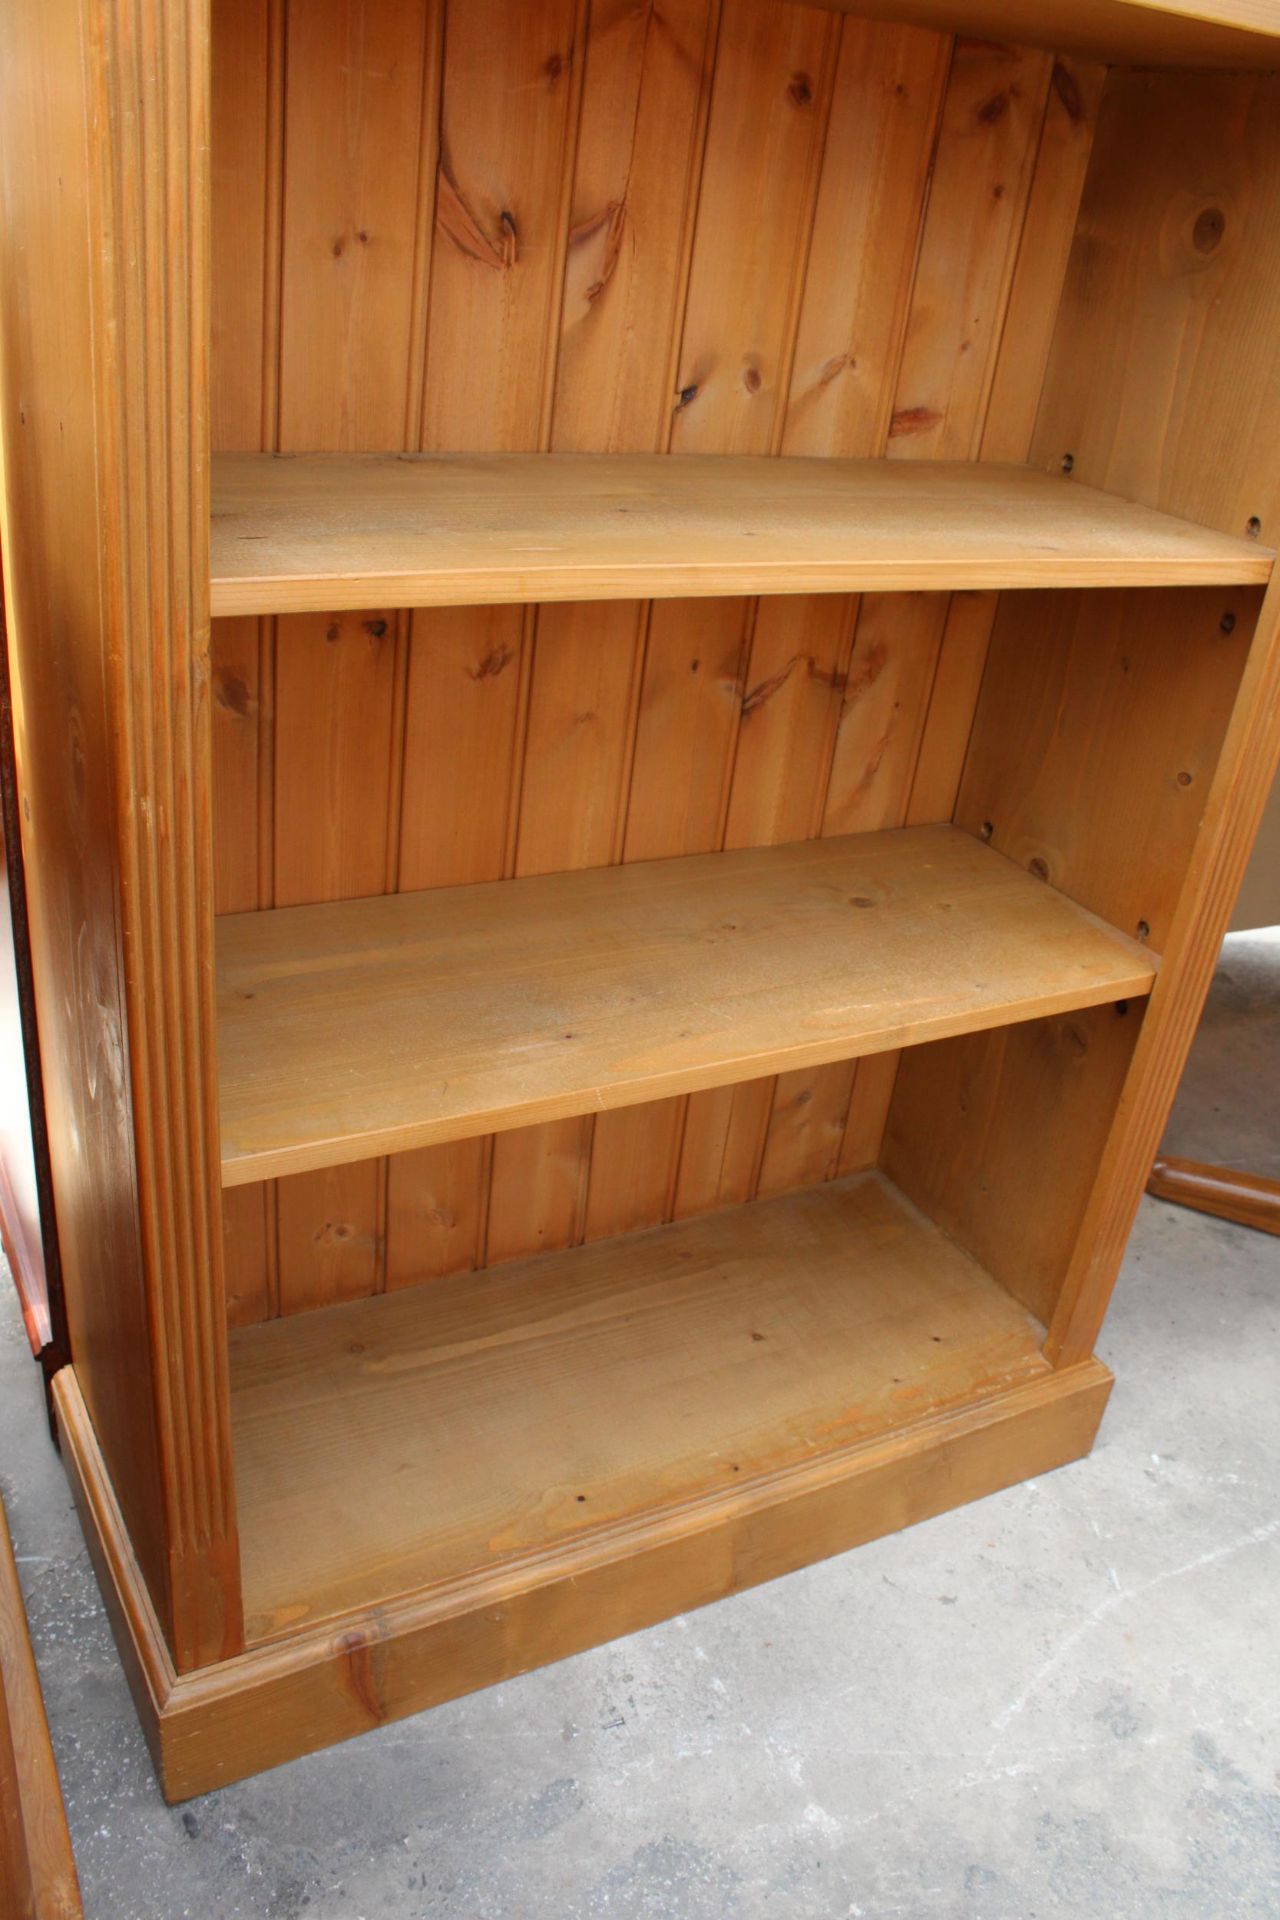 A MODERN PINE FIVE TIER OPEN BOOKCASE, 35" WIDE - Image 3 of 3